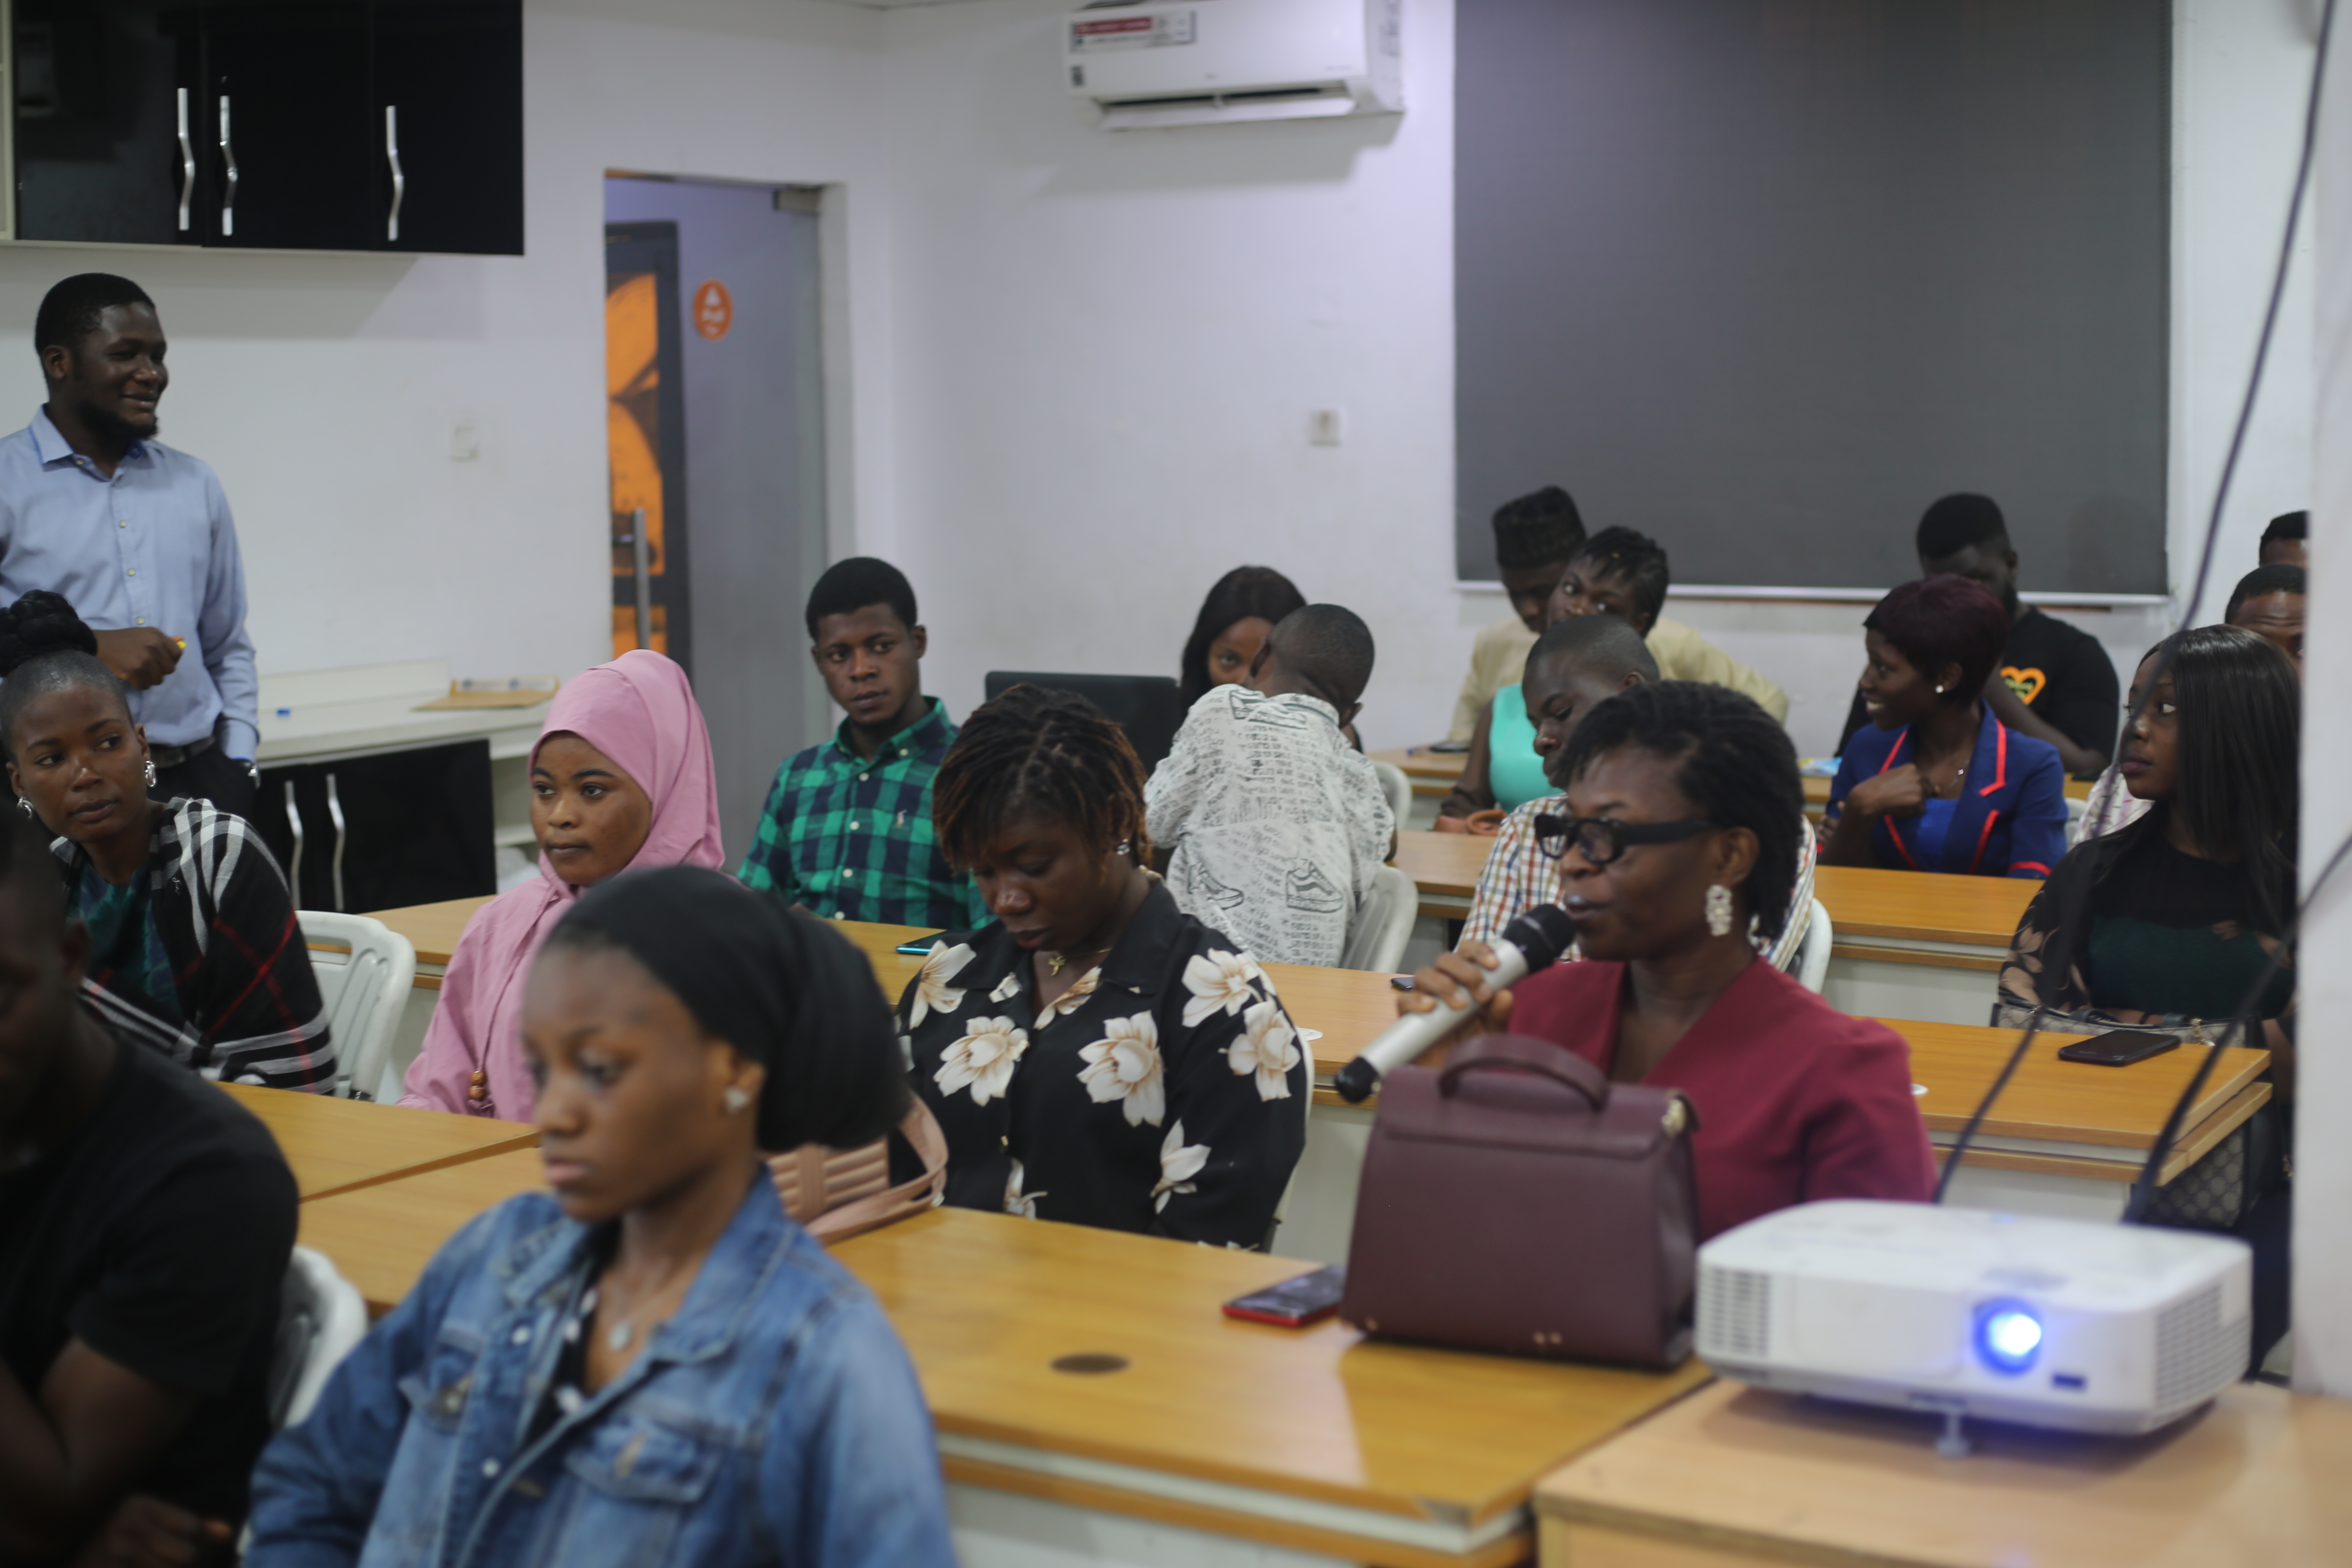 FIJ Trains Journalists in Social Justice Reporting